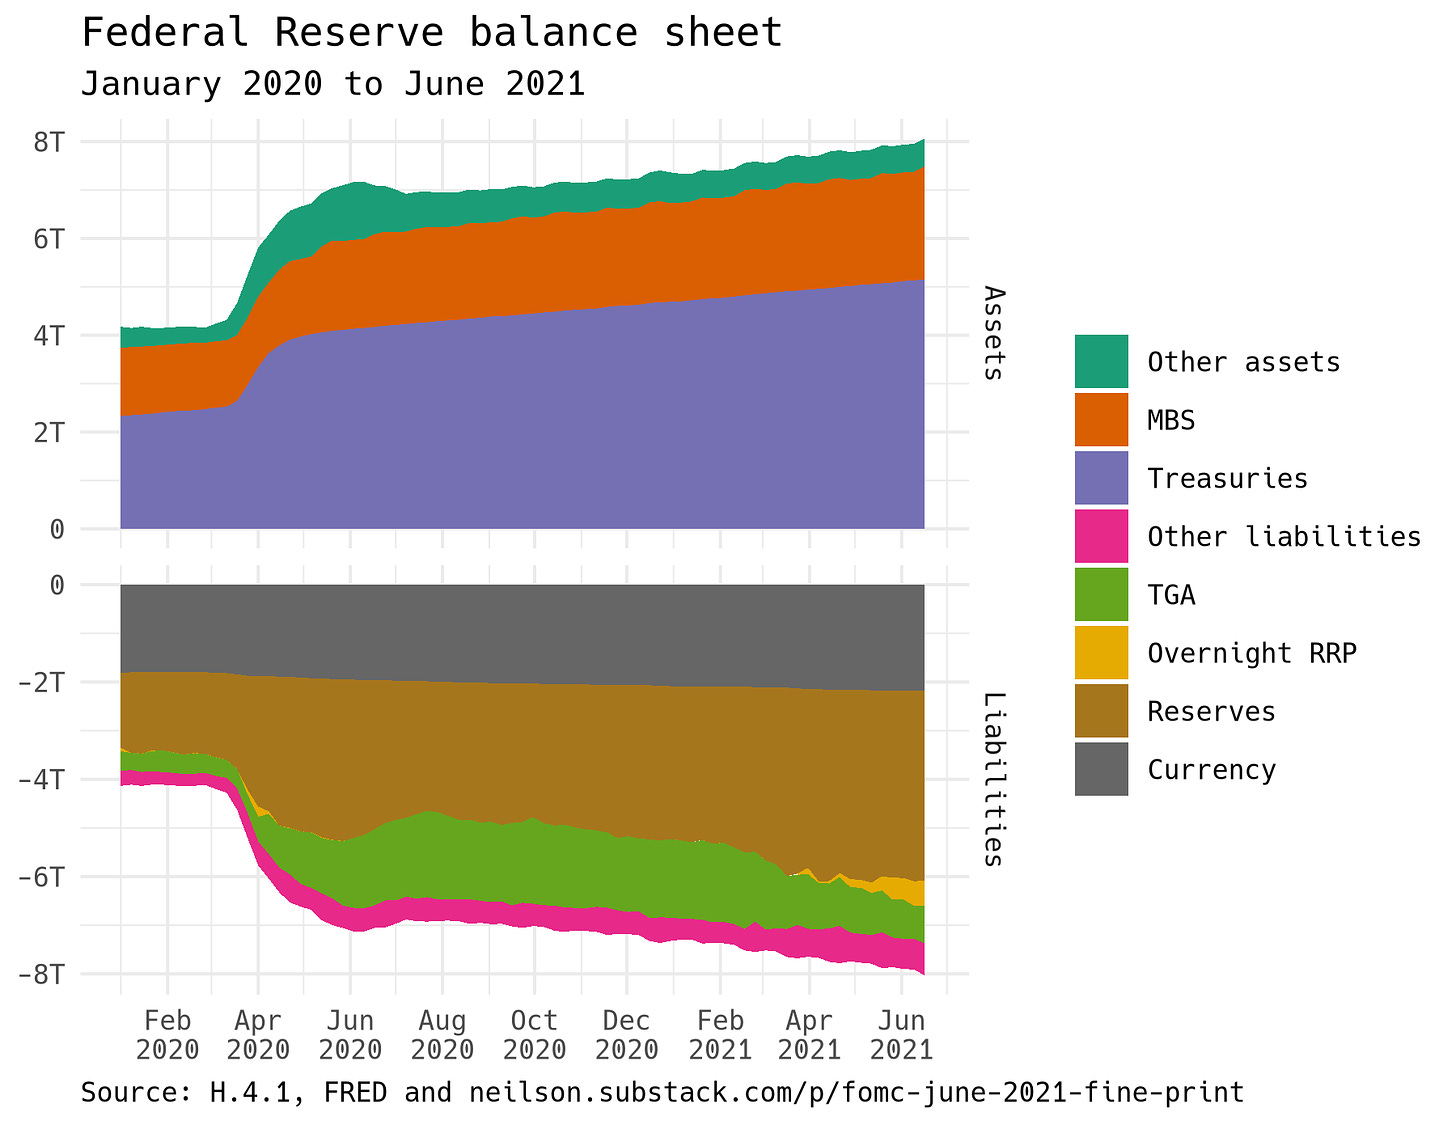 Graph showing the major components of the Fed's balance sheet from January 2020 to June 2021